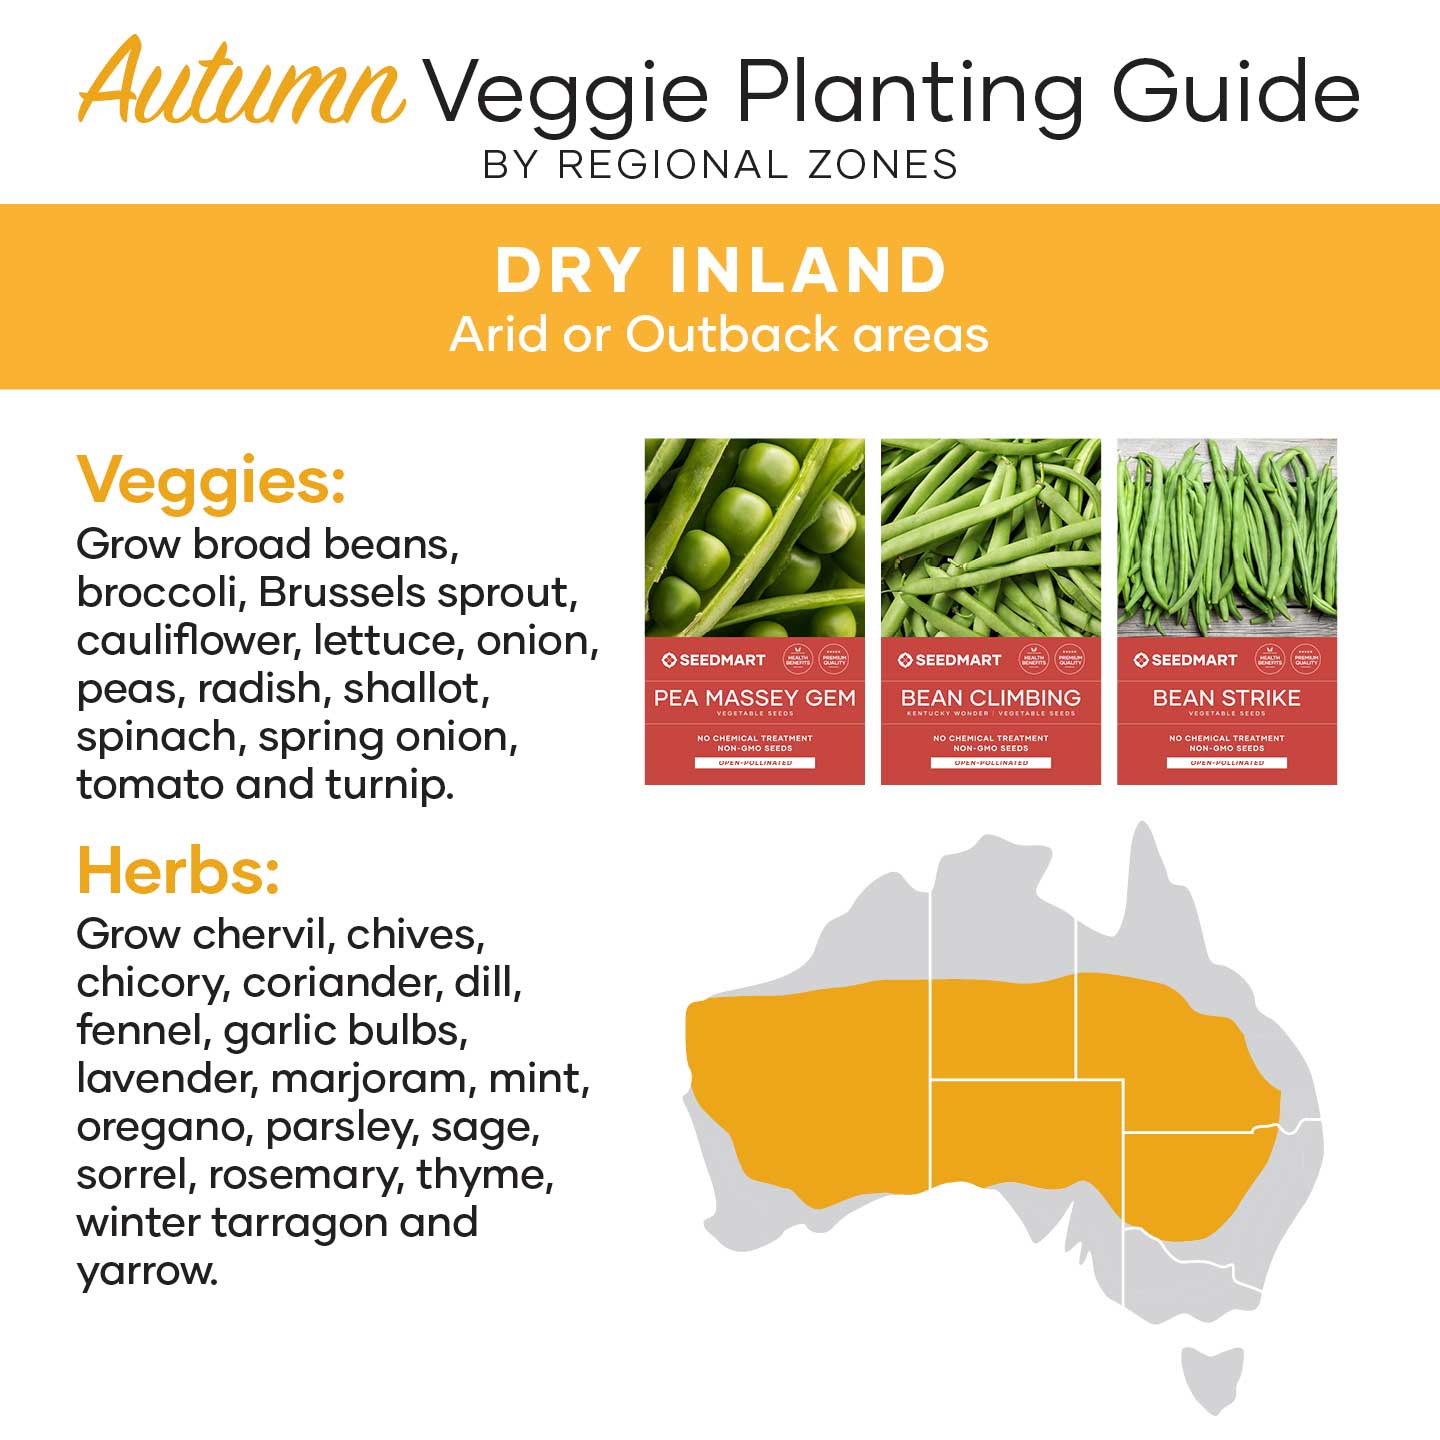 Which Herbs and Vegetables to Grow in Dry Region of Australia in Autumn